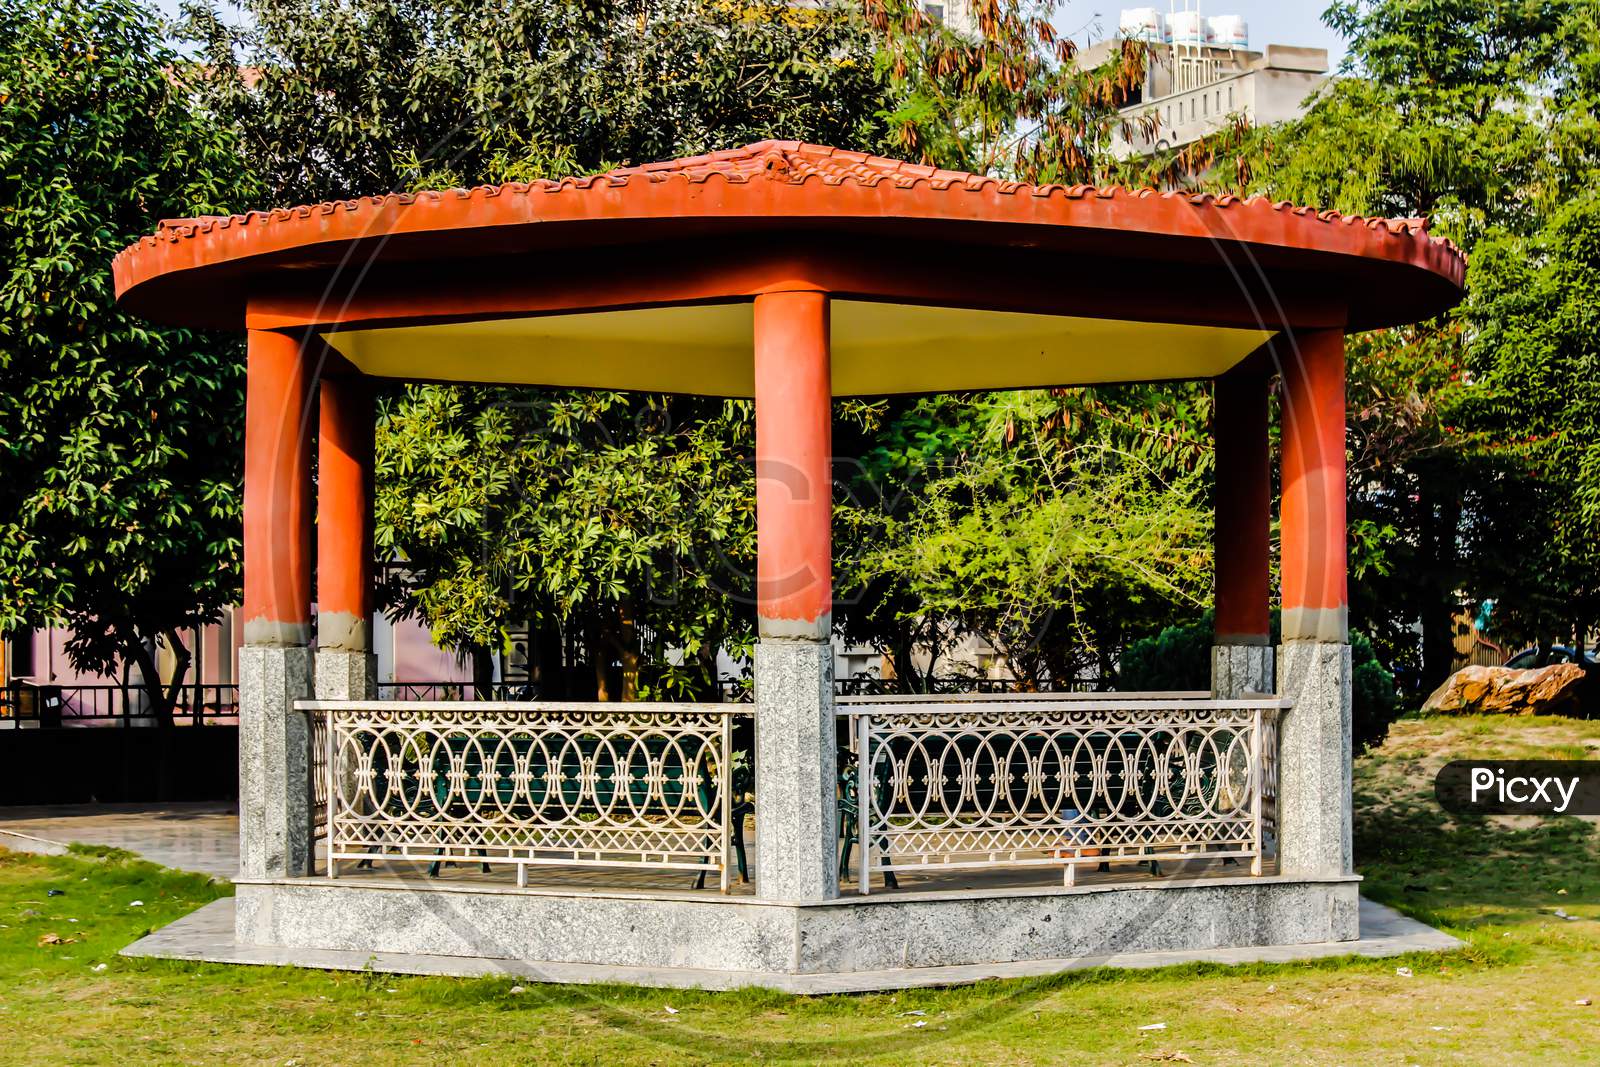 A Shelter With Benches In an Park